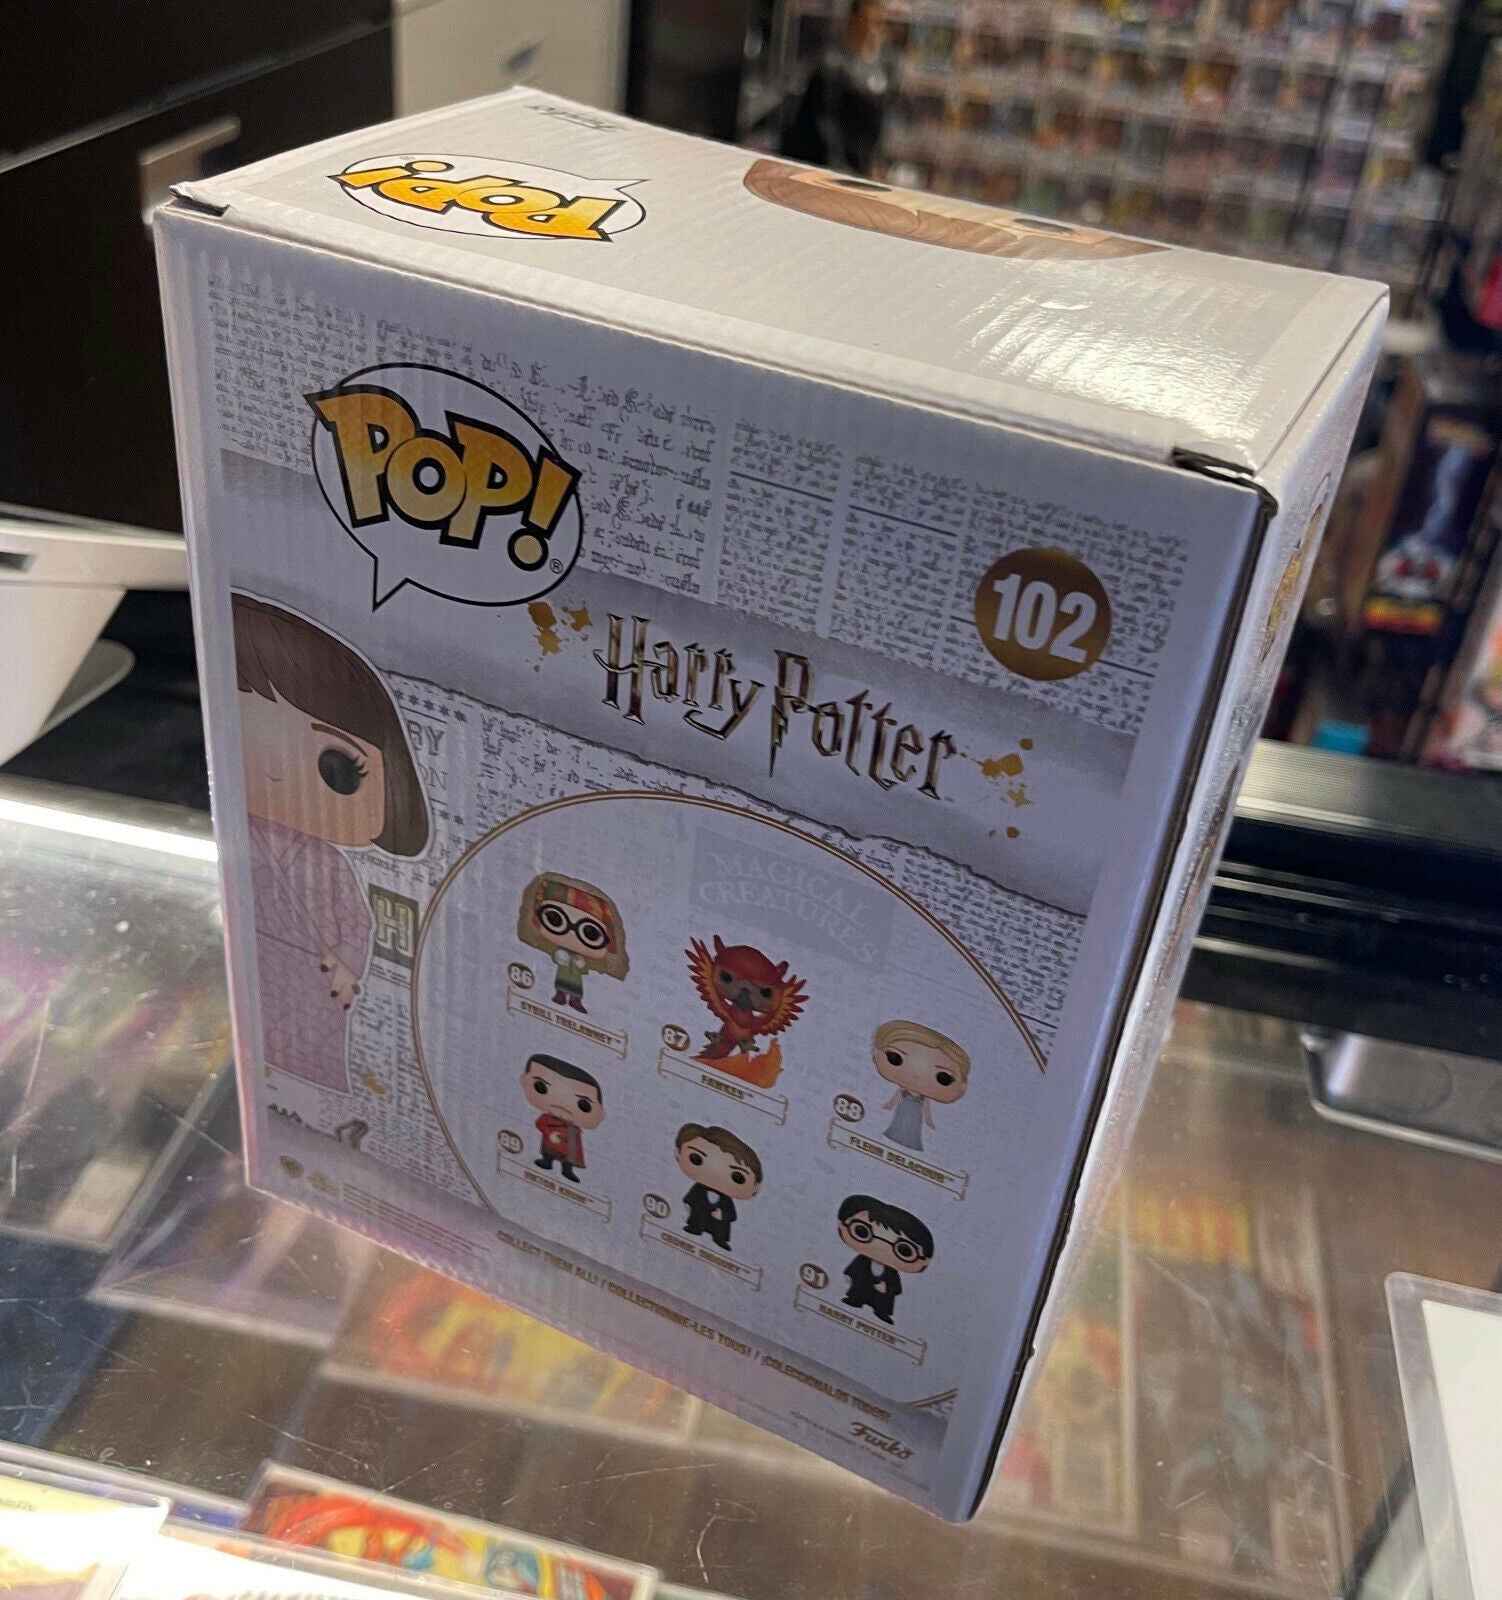 Funko Pop! Harry Potter Madame Maxine 102 2019 Fall Convention Exclusive